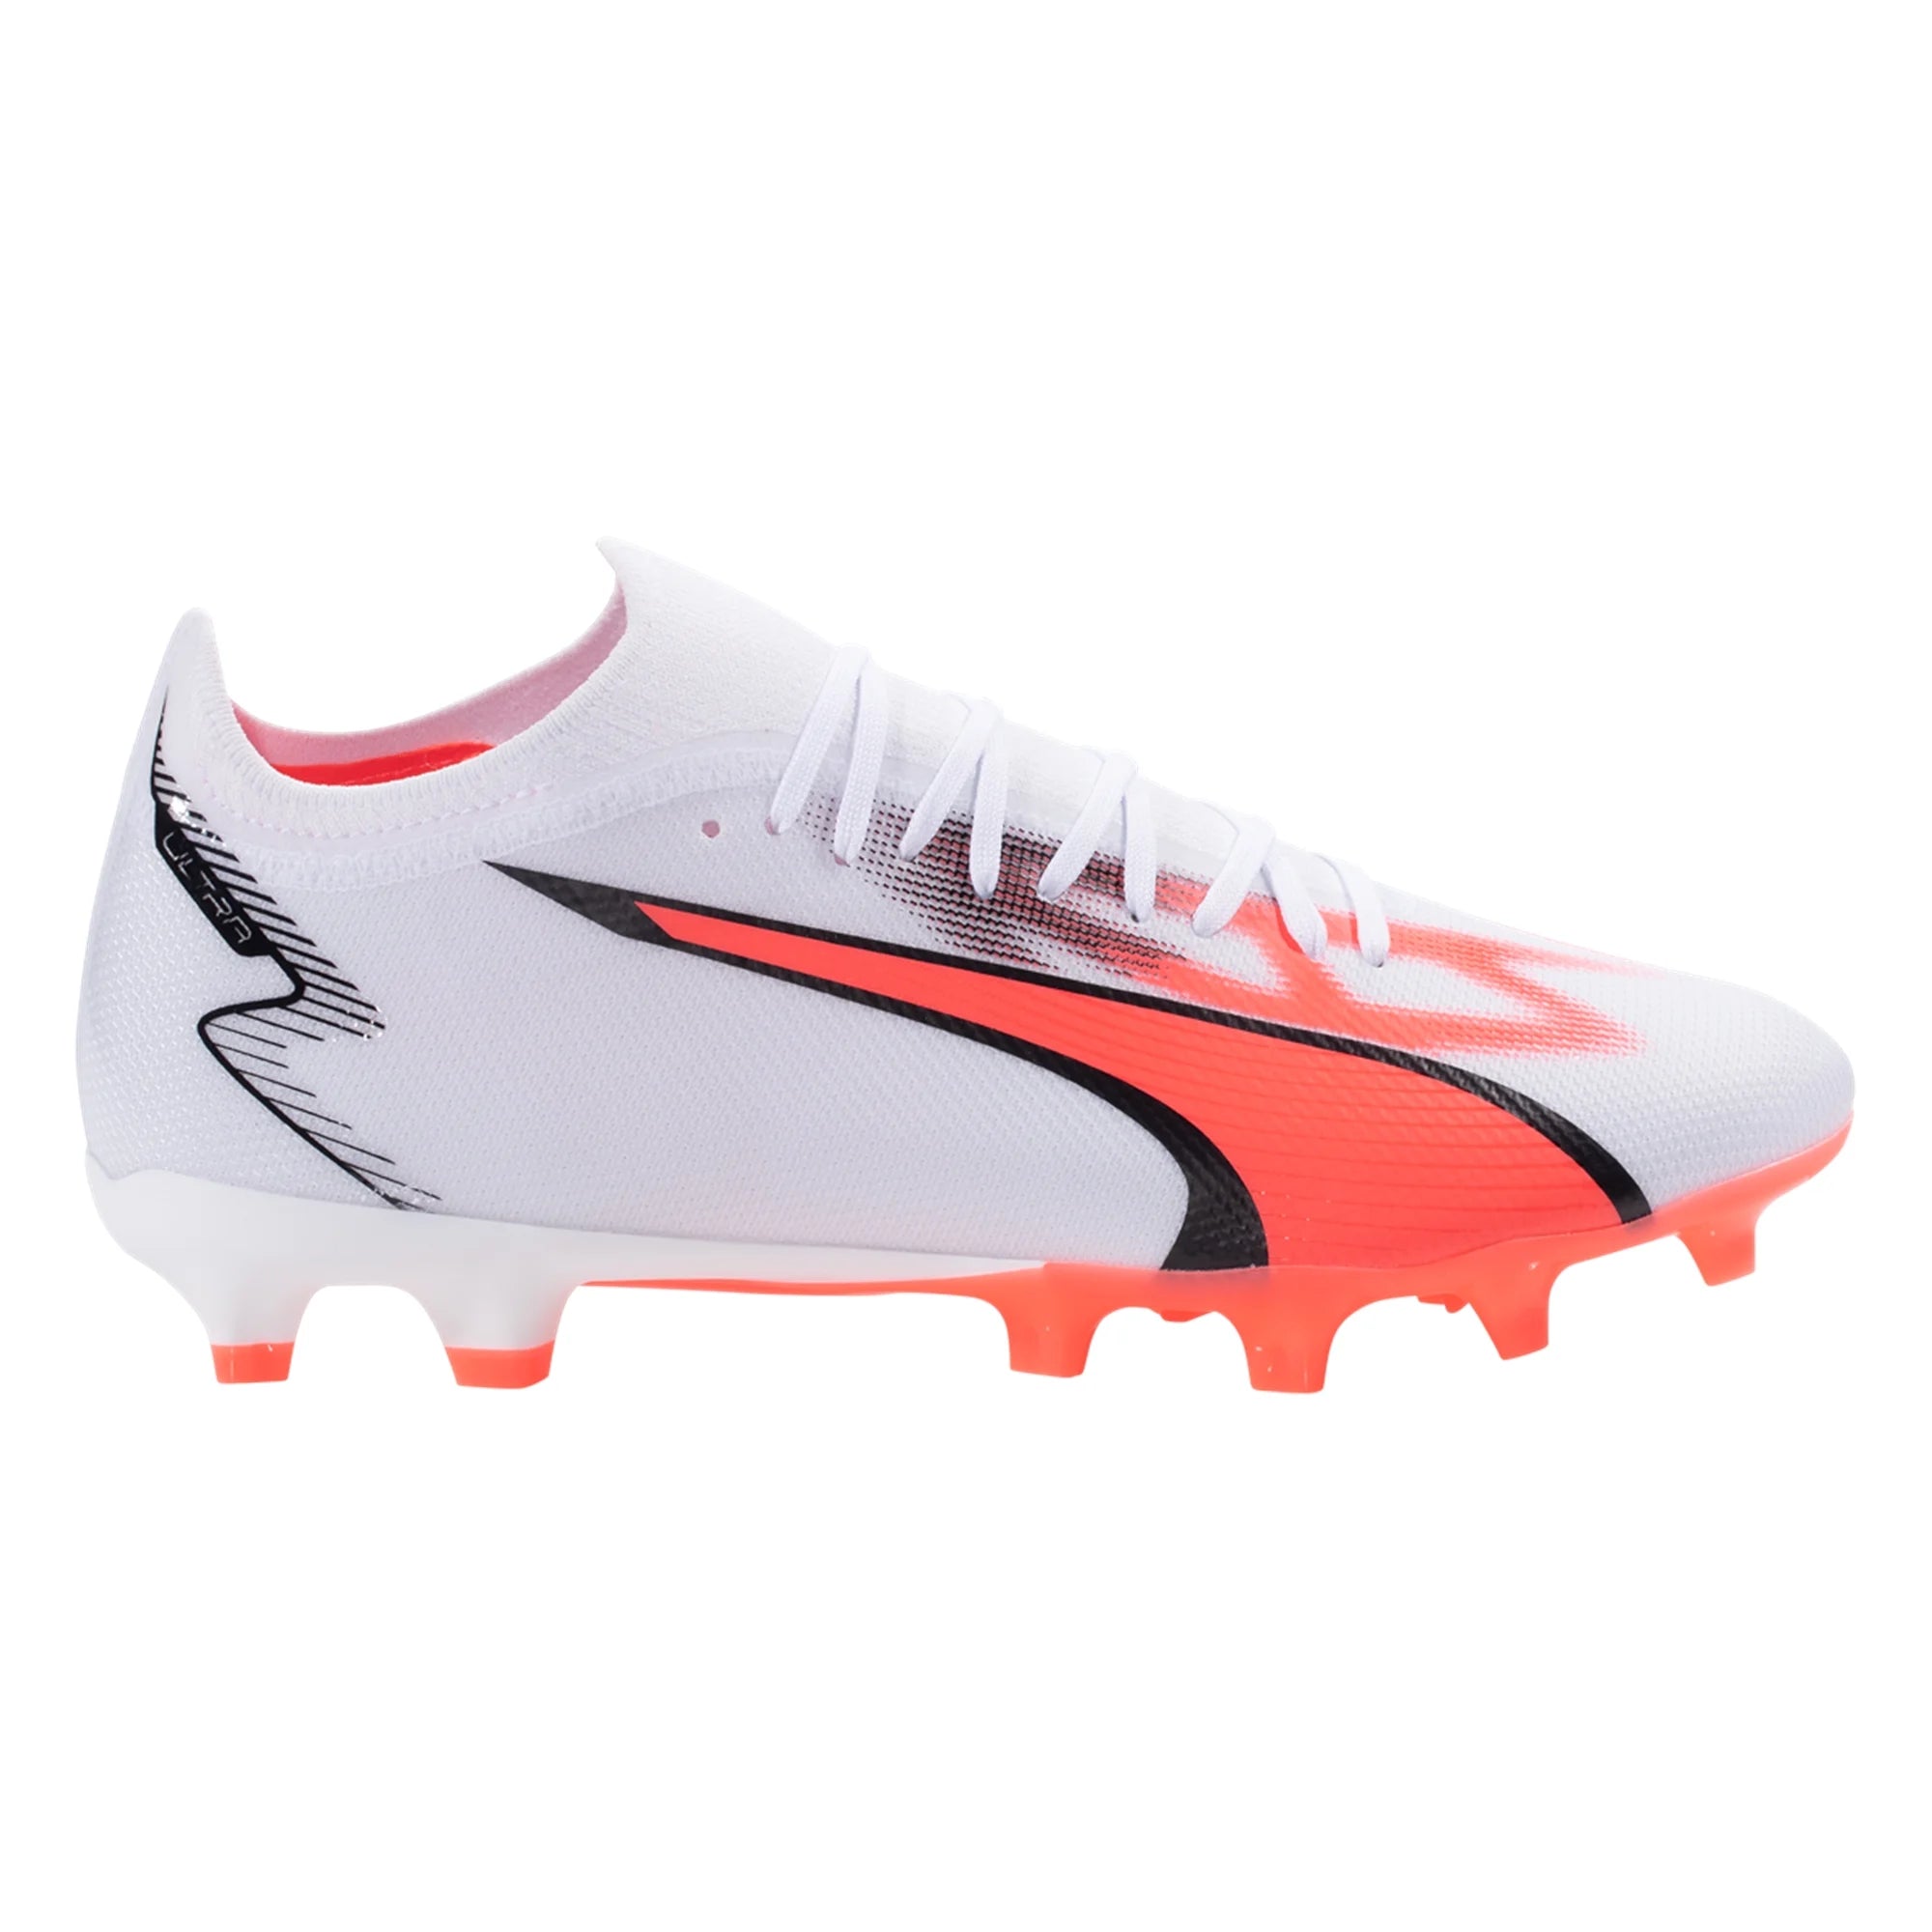 Puma Ultra Match White/Black/Fire Orchid – Soccer Cleat - 107347-01 Soccer USA Ground FG/AG Firm Zone